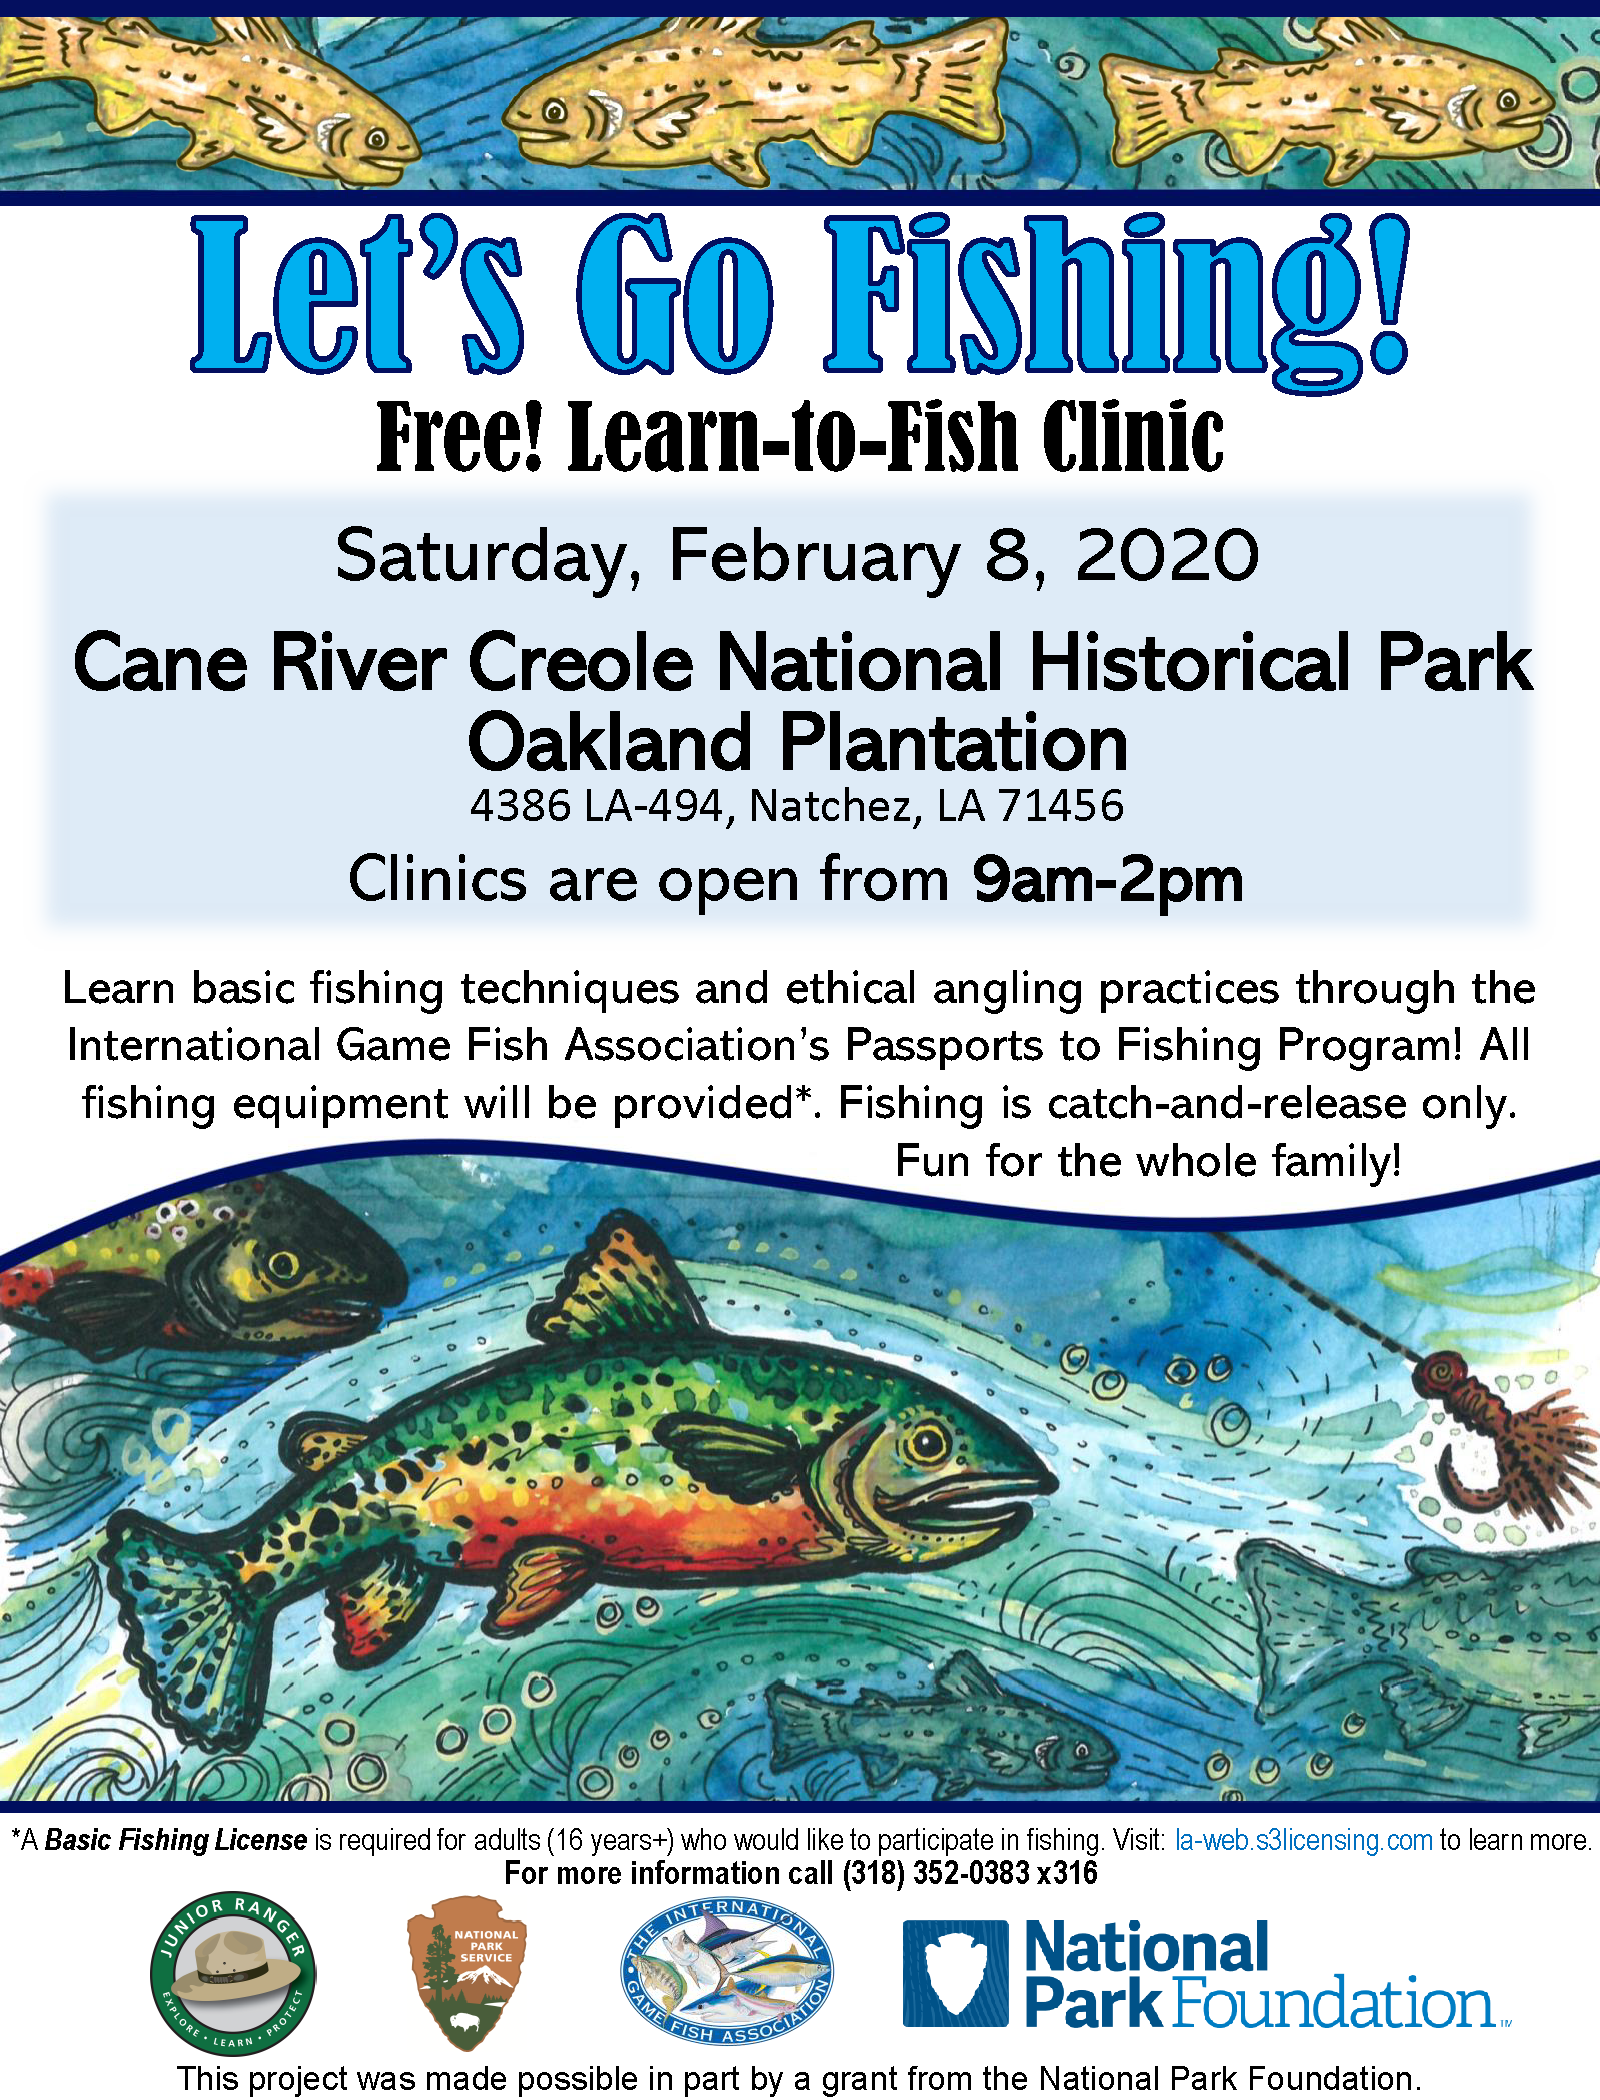 https://igfa.org/wp-content/uploads/2019/12/Cane-River-Learn-to-Fish-Flyer.png